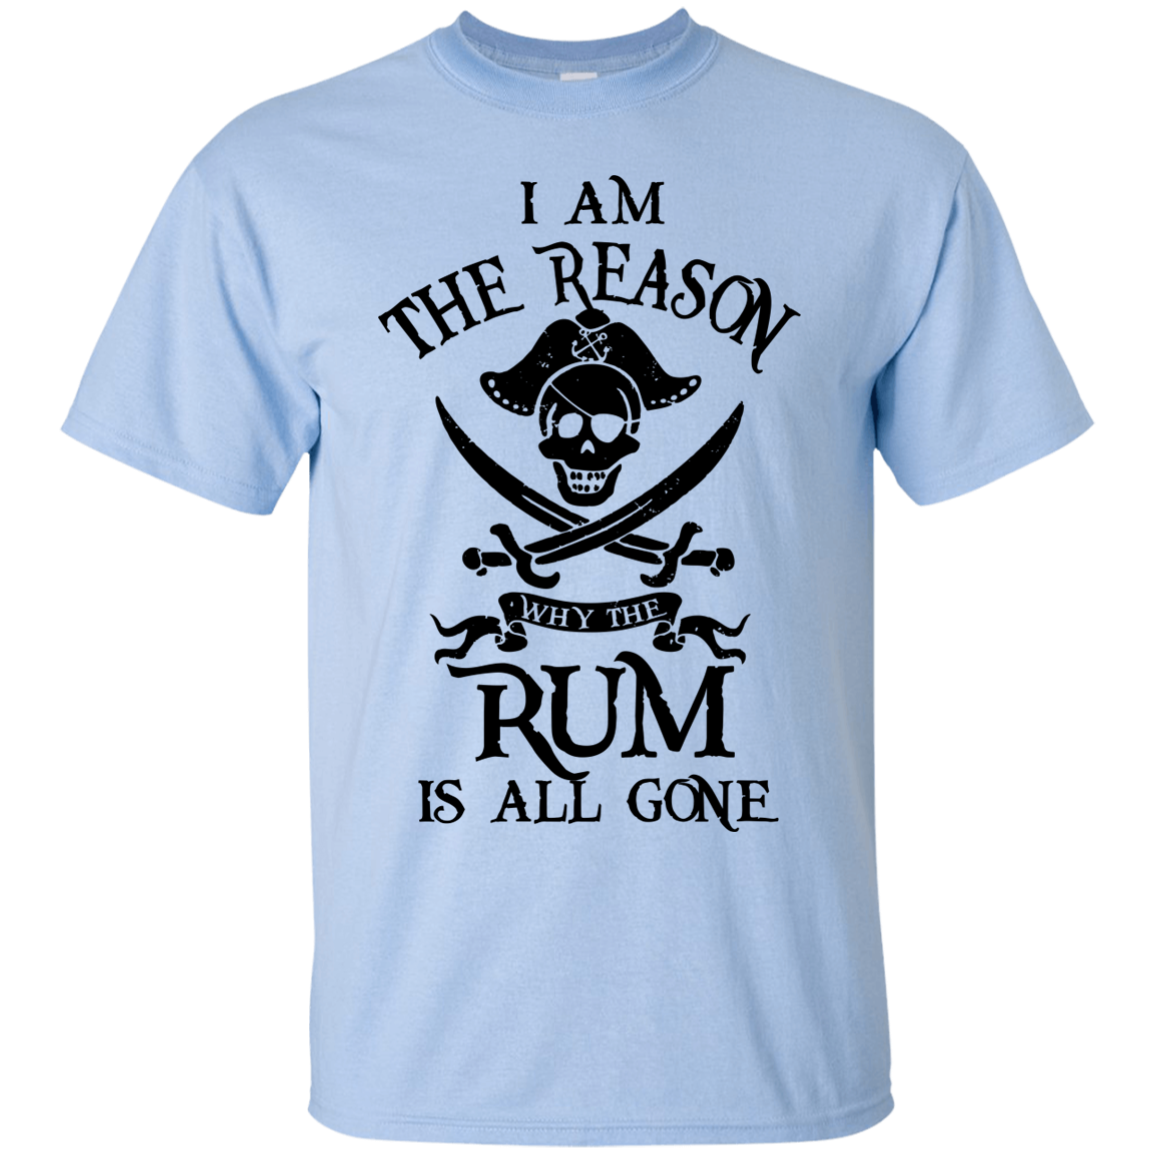 Pirates are hot, and so is their merchandise